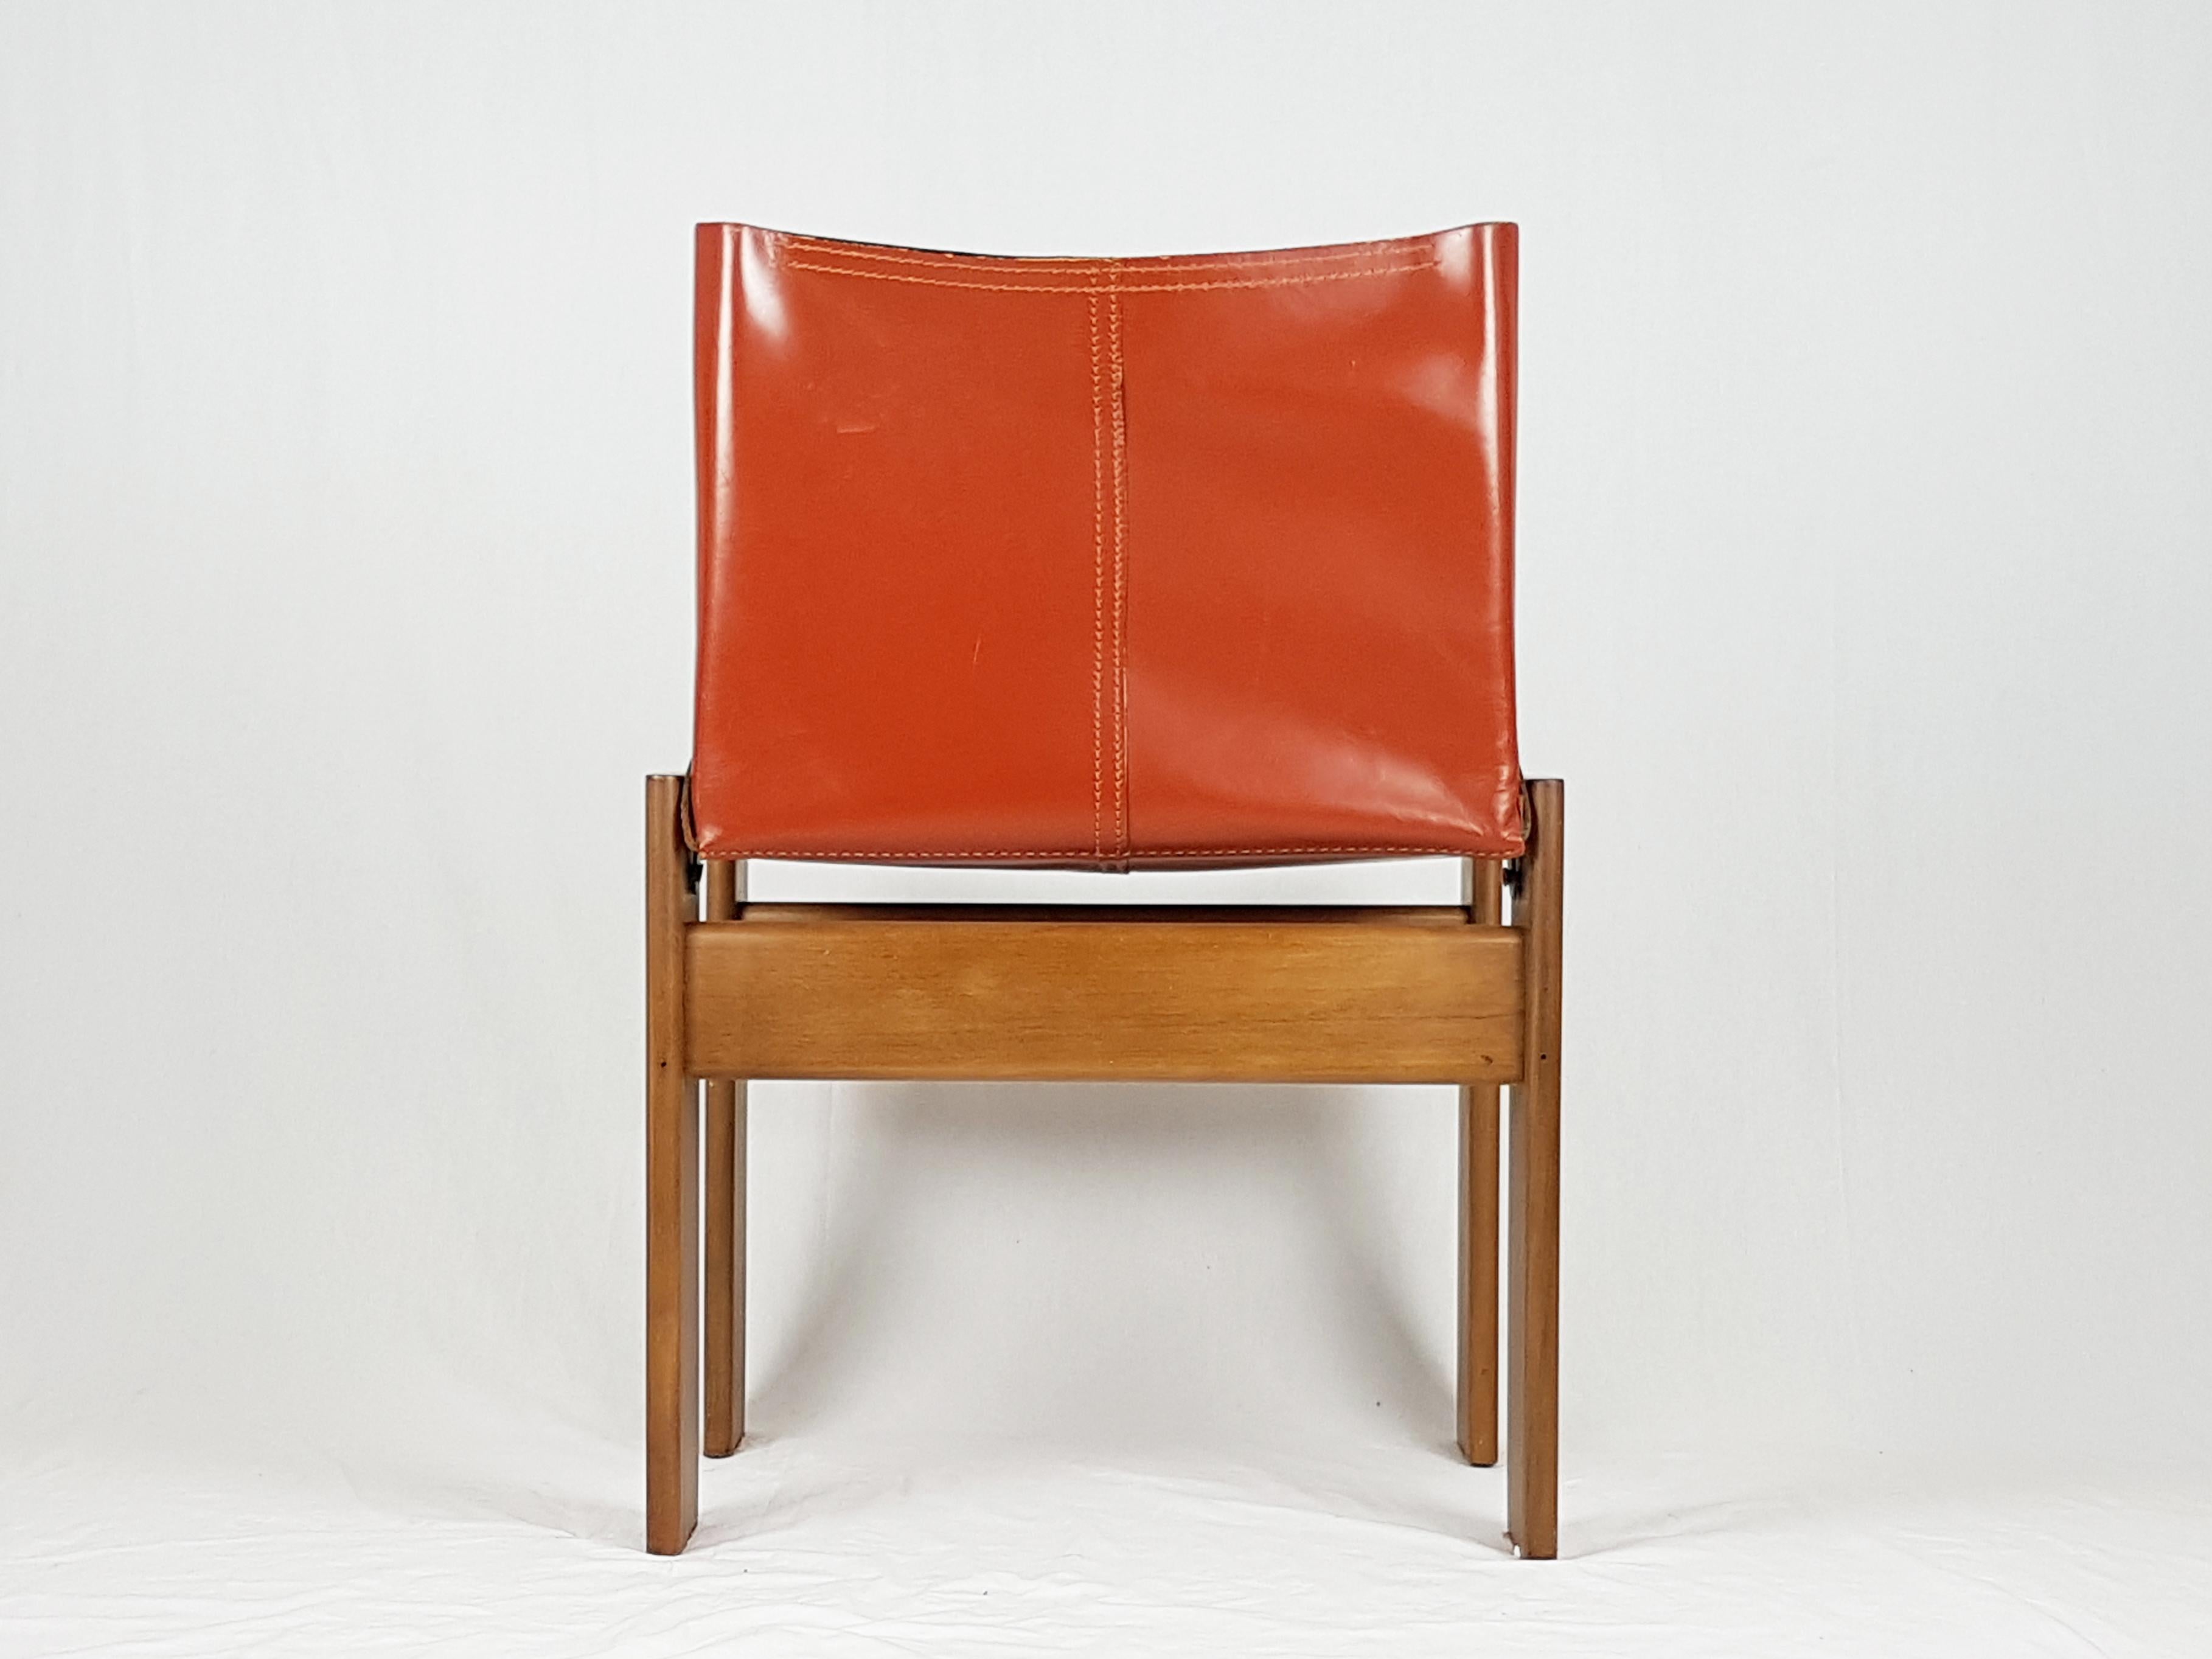 Brick Red leather and Walnut 1974 Monk Chair by Afra e Tobia Scarpa for Molteni 1